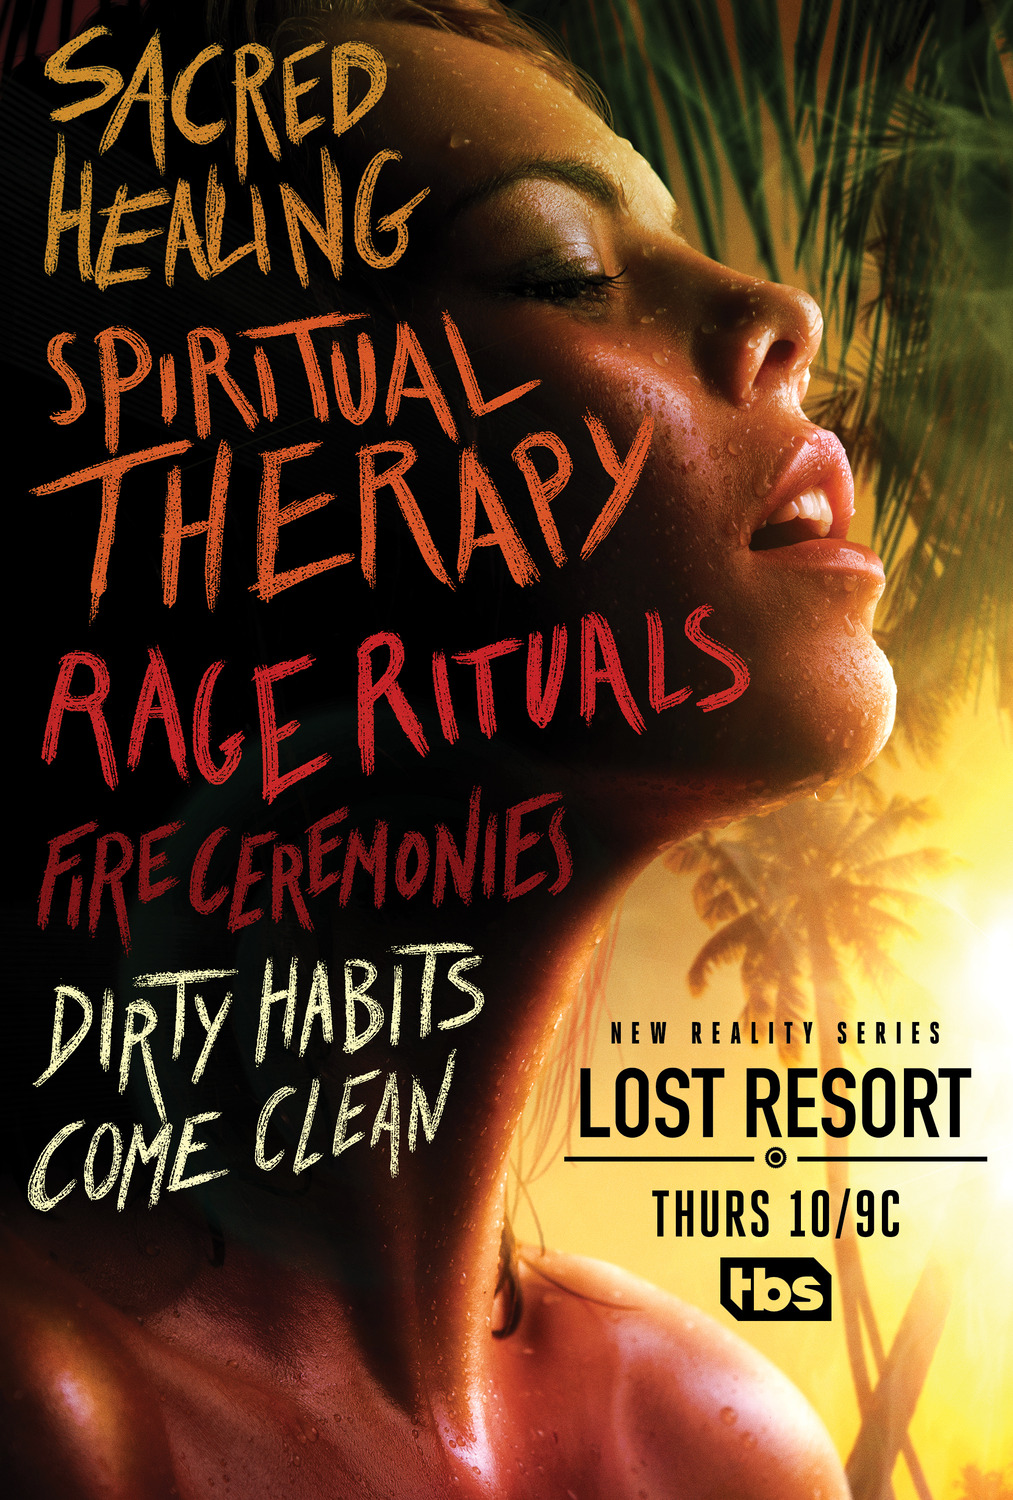 Extra Large TV Poster Image for Lost Resort 